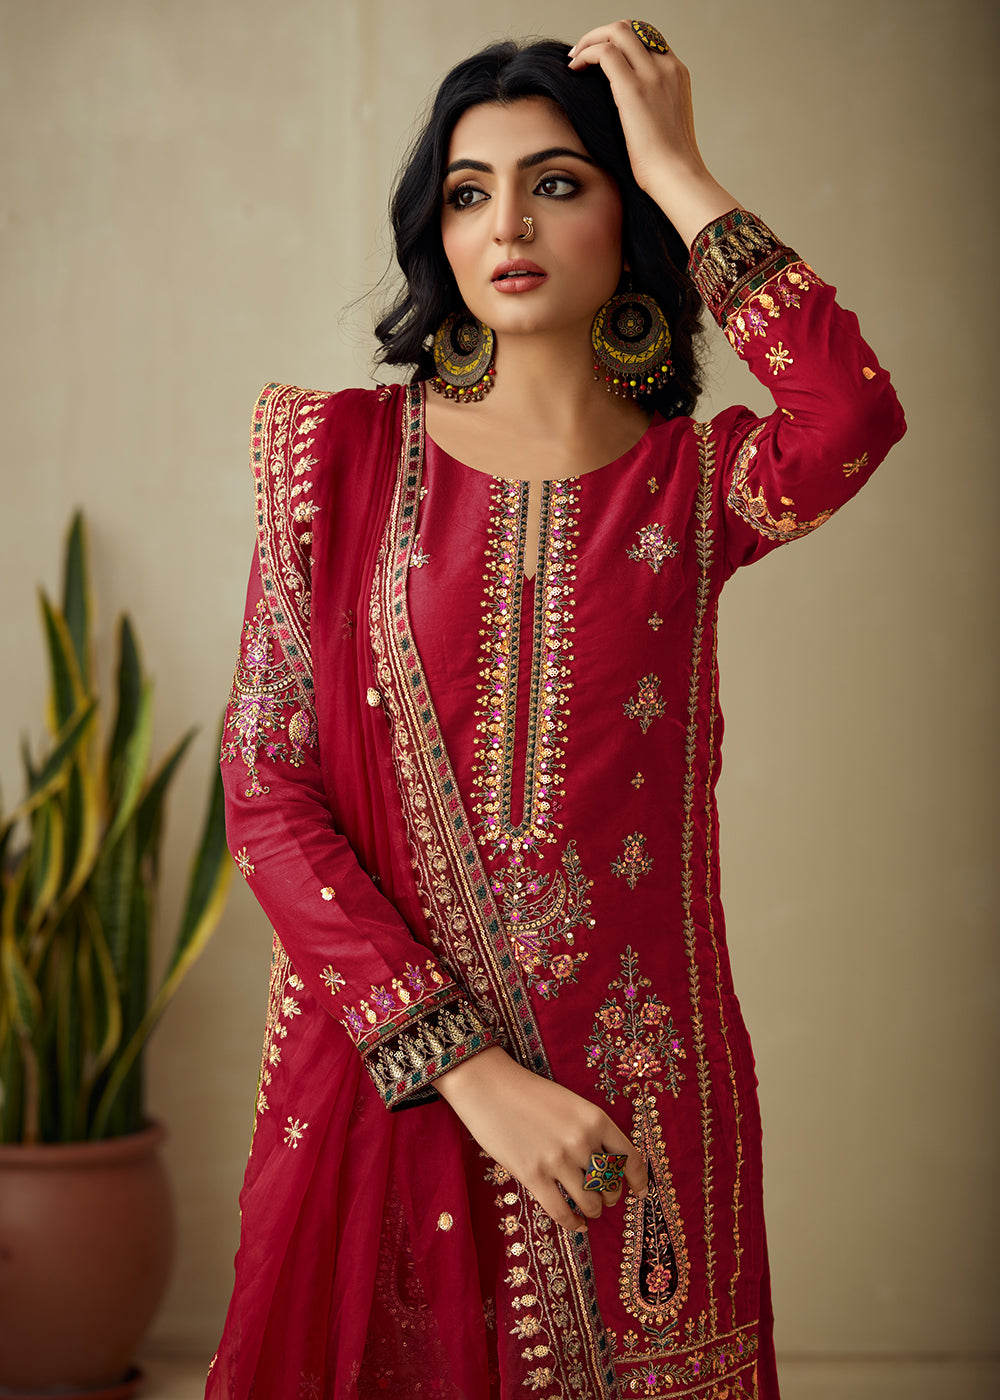 Buy Now Vivid Red Organza Embroidered Traditional Salwar Kameez Online in USA, UK, Canada, Germany, Australia & Worldwide at Empress Clothing